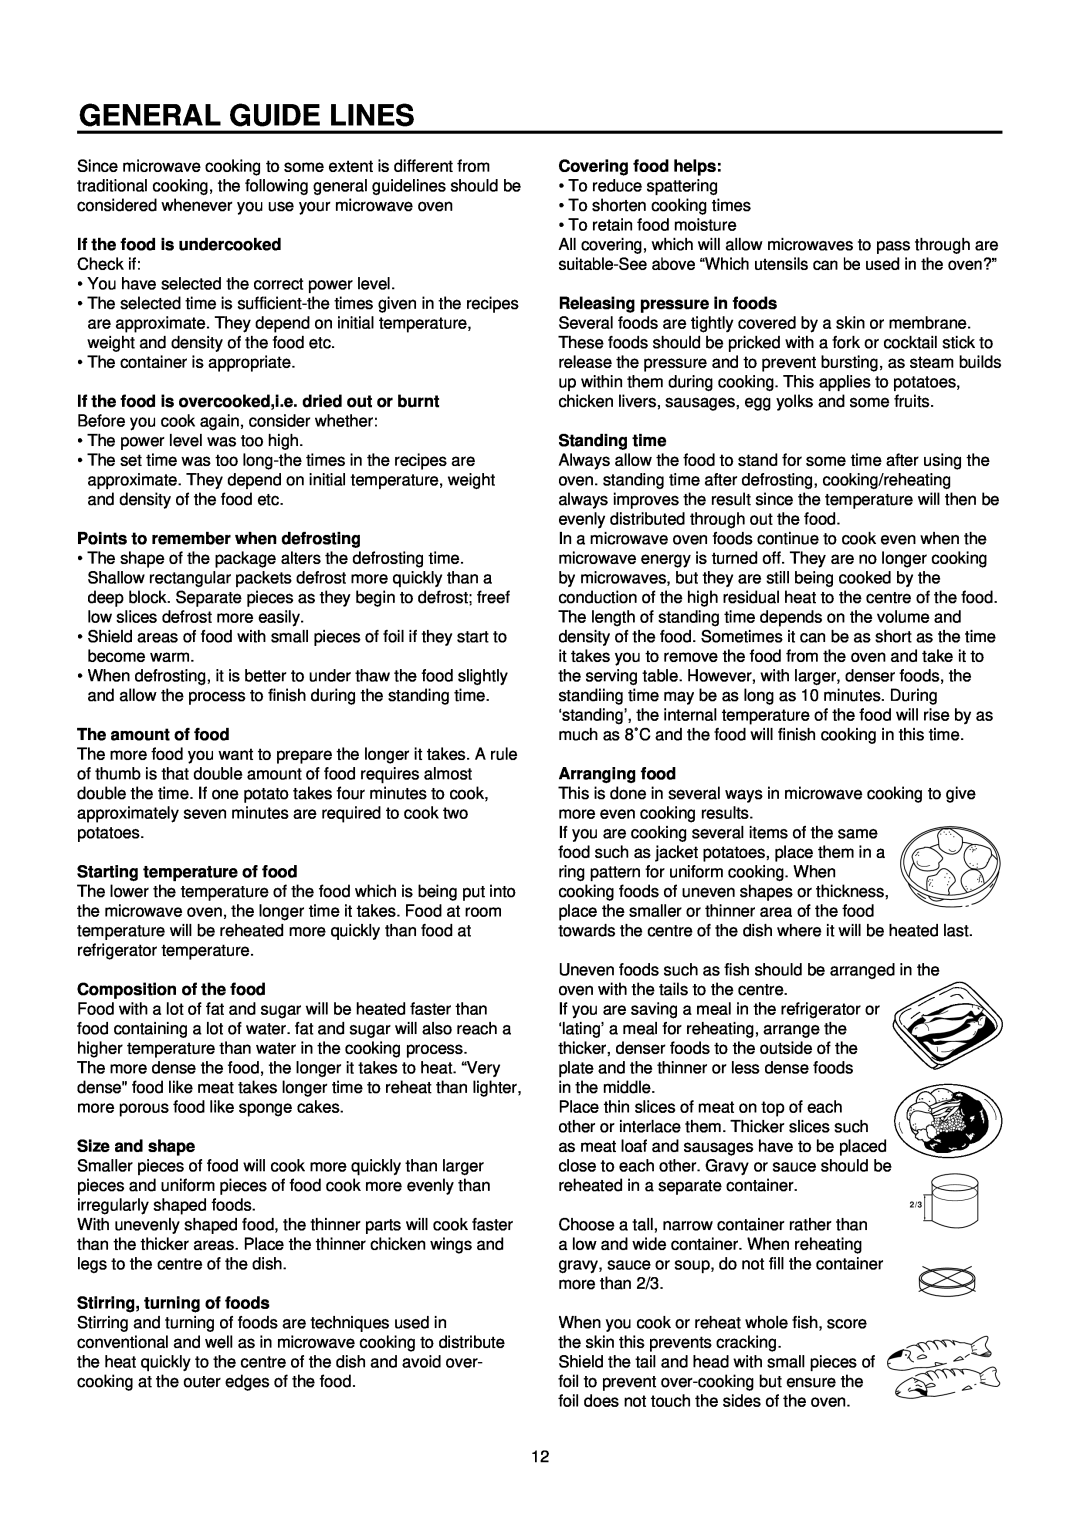 Daewoo KOC-873TSL General Guide Lines, If the food is undercooked, Points to remember when defrosting, The amount of food 